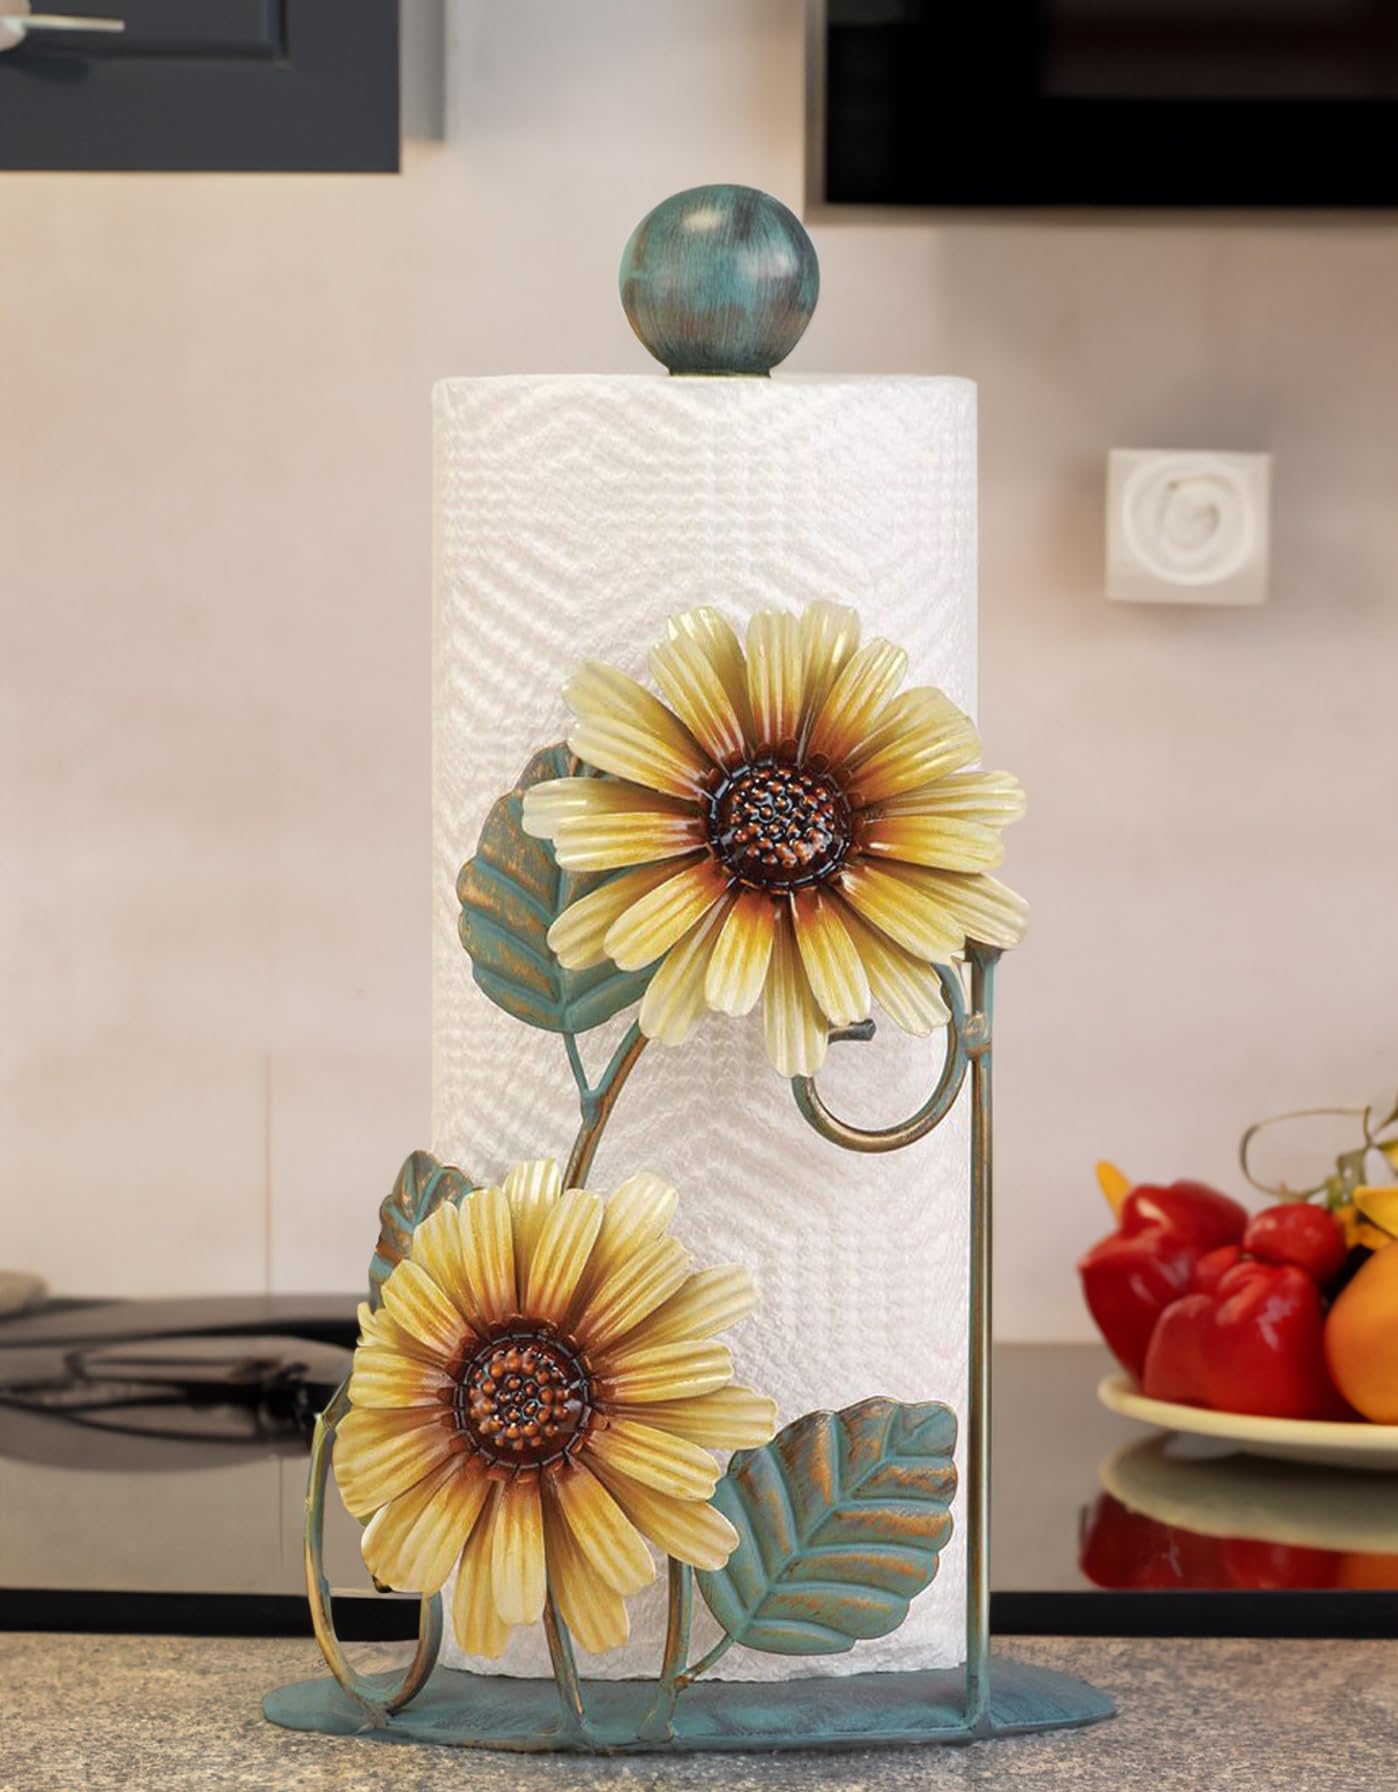 Sunflower-Themed Paper Towel Holder- Indoor Decorative Accent and Practical Accessory for Kitchen & Dining-Beautifully Designed Rustic Farmhouse Stand for Countertops,Complementing Sunflower Dish Sets